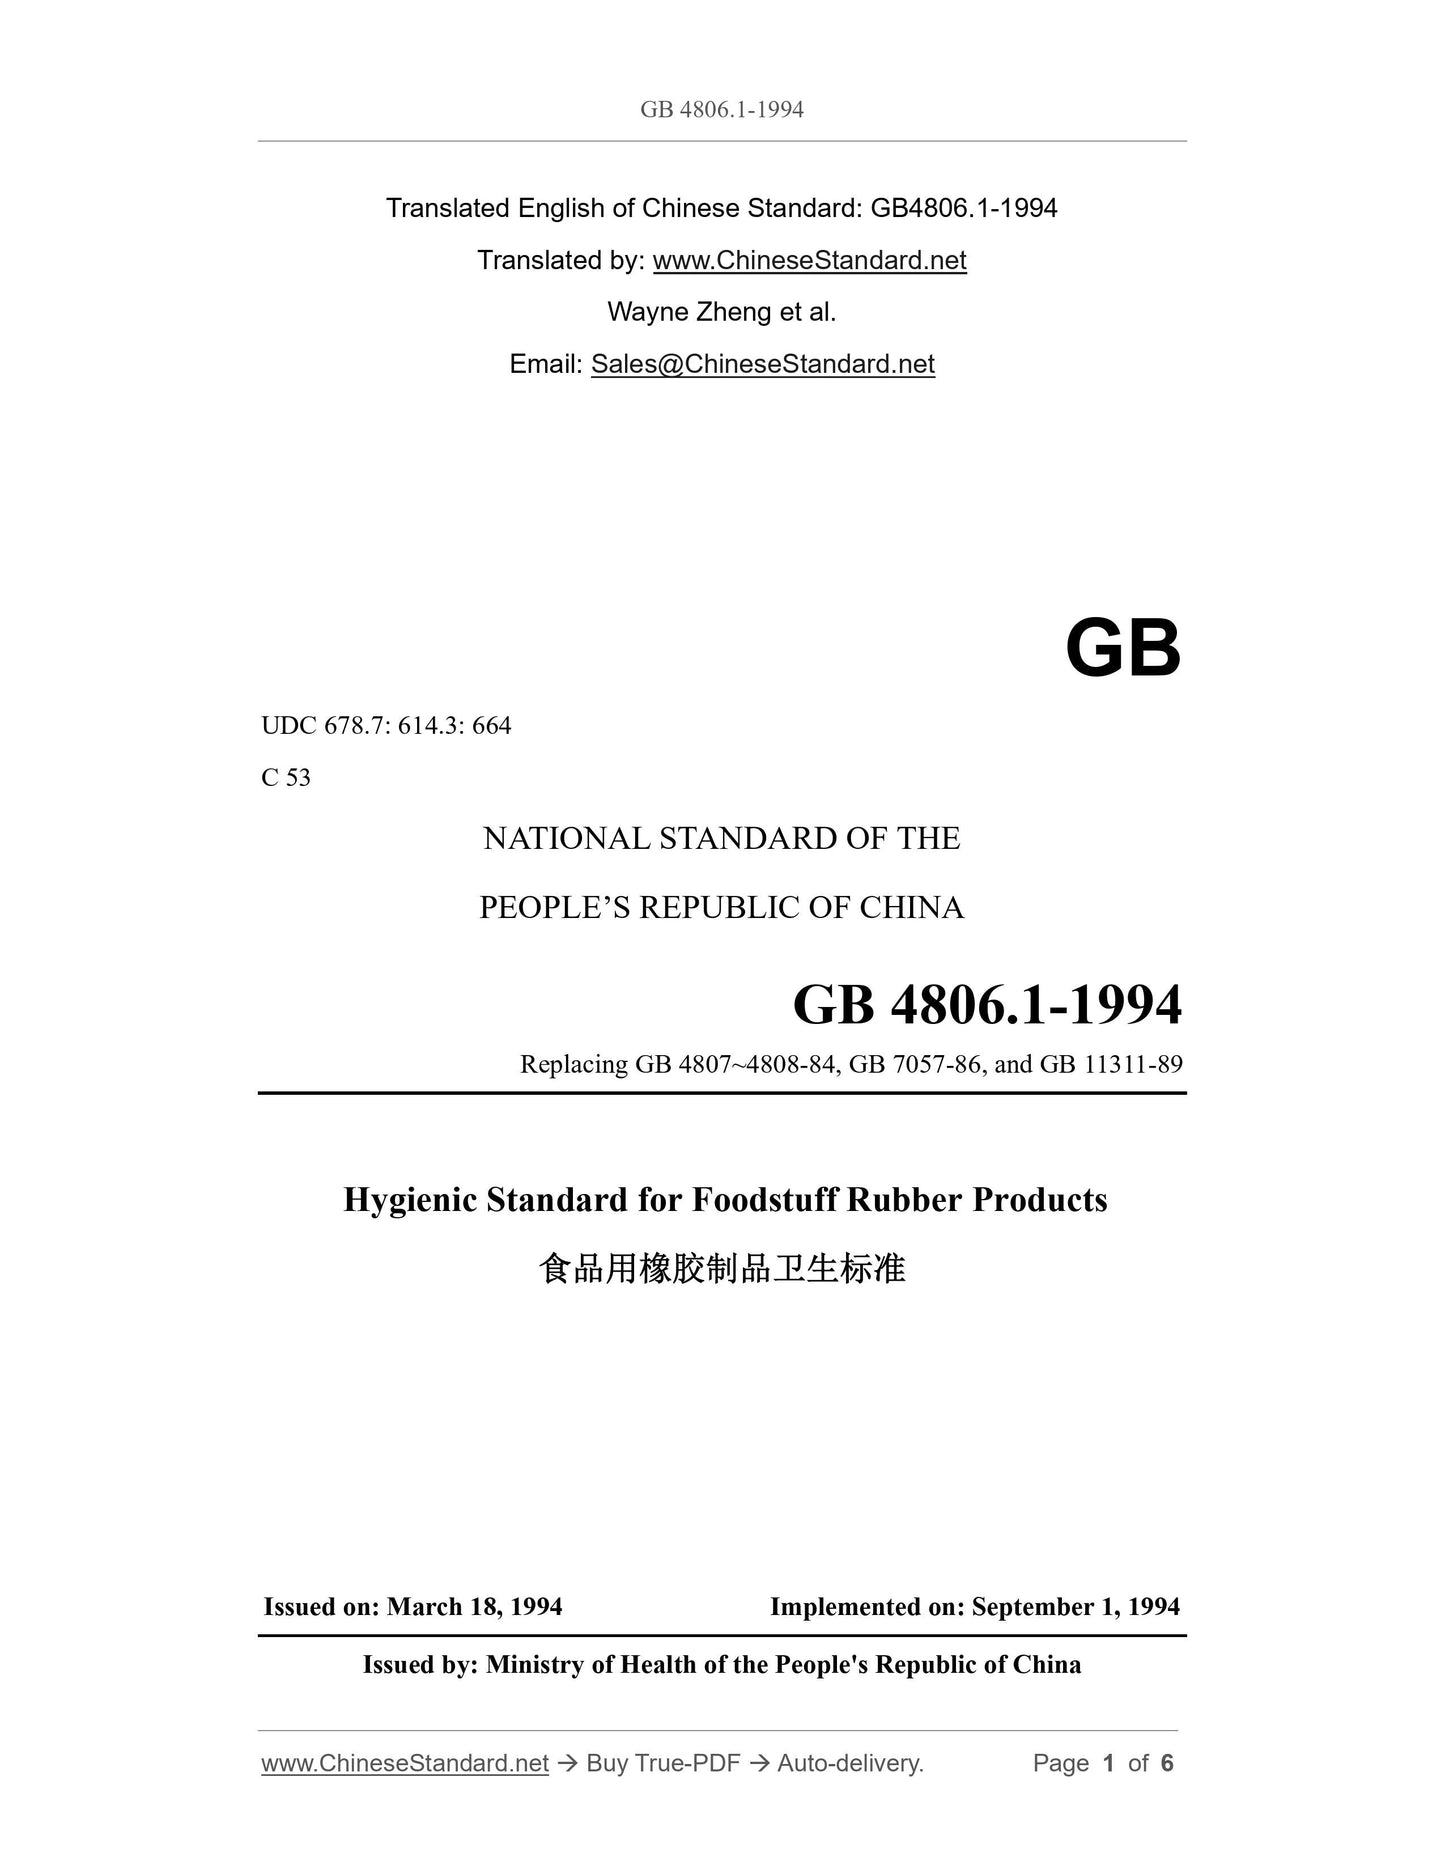 GB 4806.1-1994 Page 1